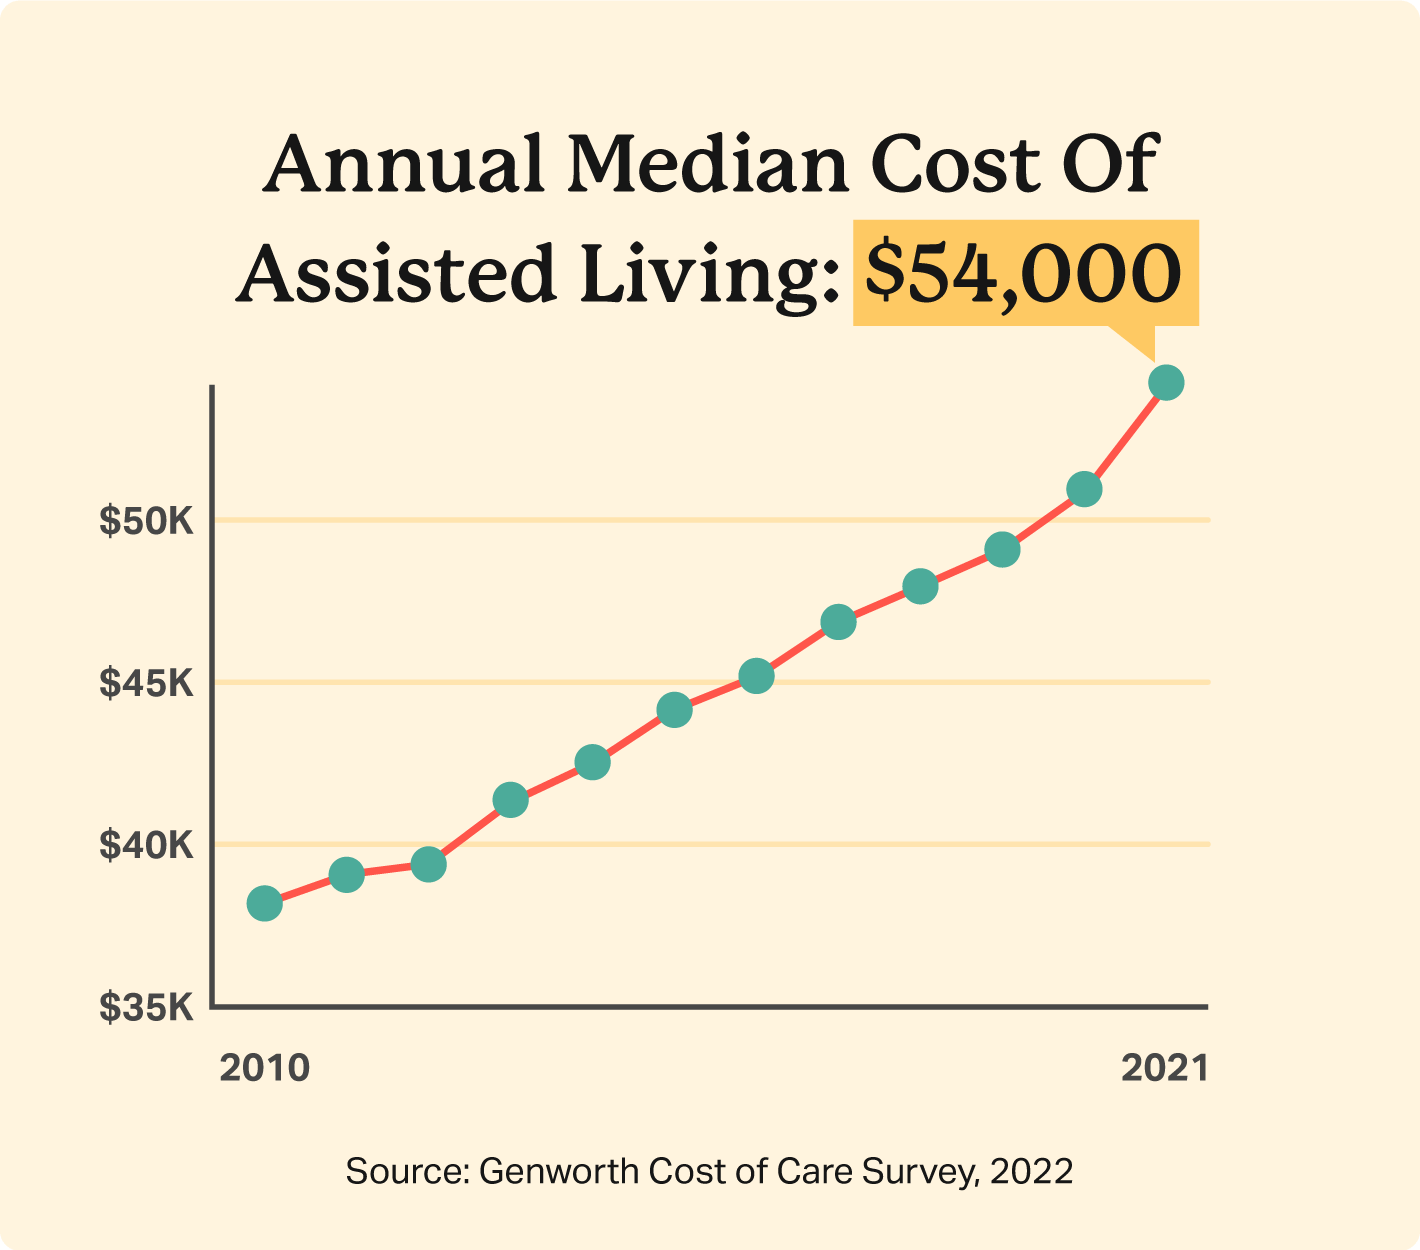 Chart shows how the annual median cost of assisted living has increased since 2010 to the 2021 median of $54,000.